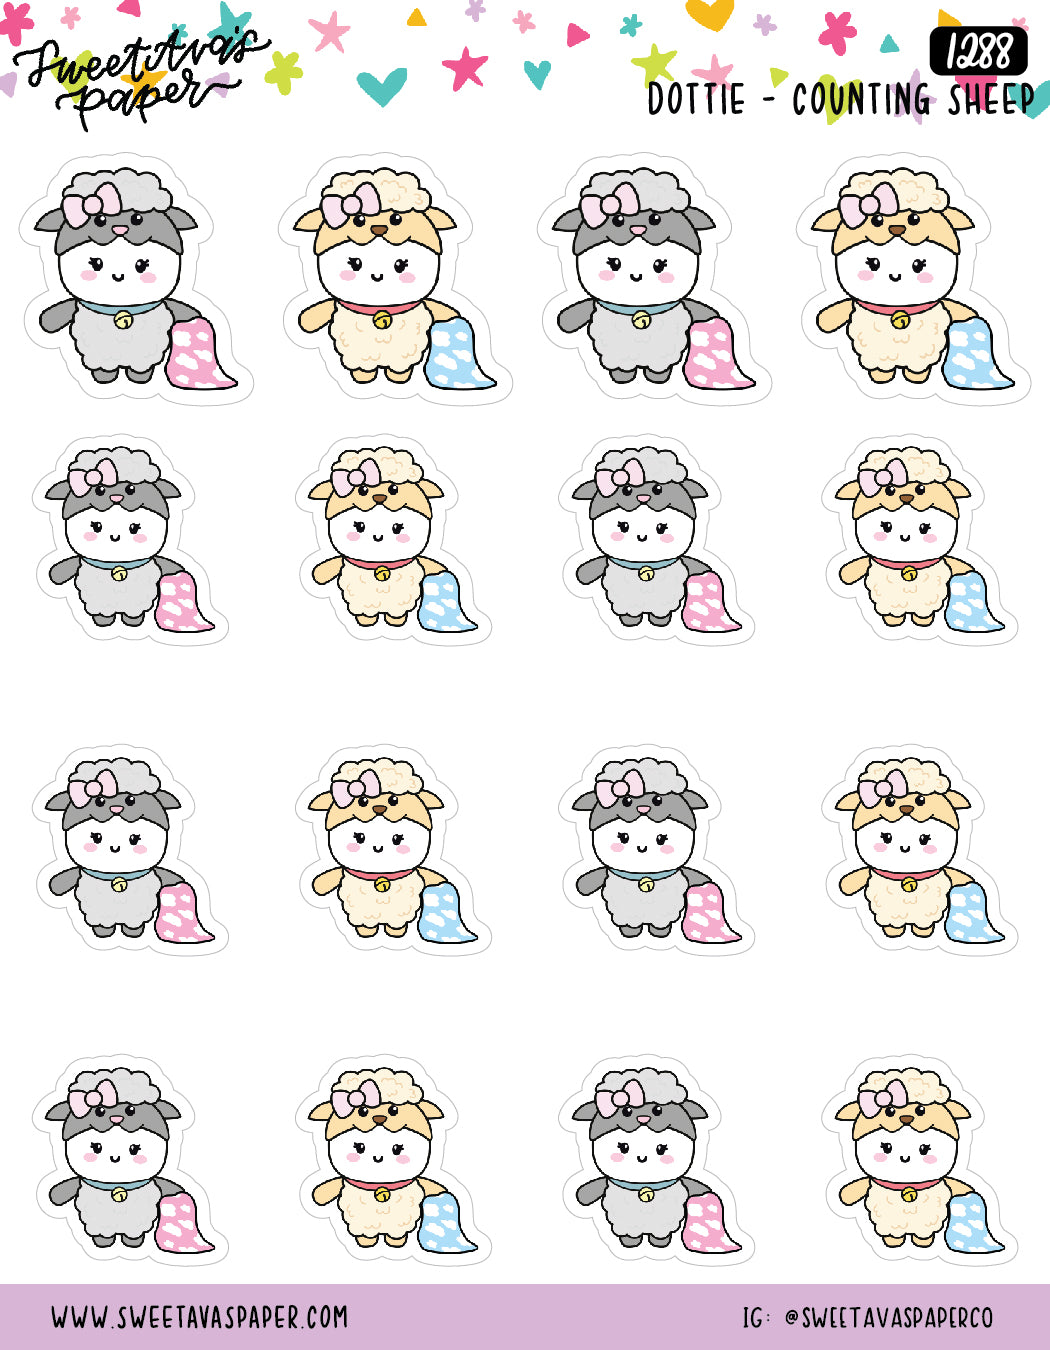 Counting Sheep Stickers - Nap Stickers - Sleep Stickers - Tired Planner Stickers - Dottie [1288]